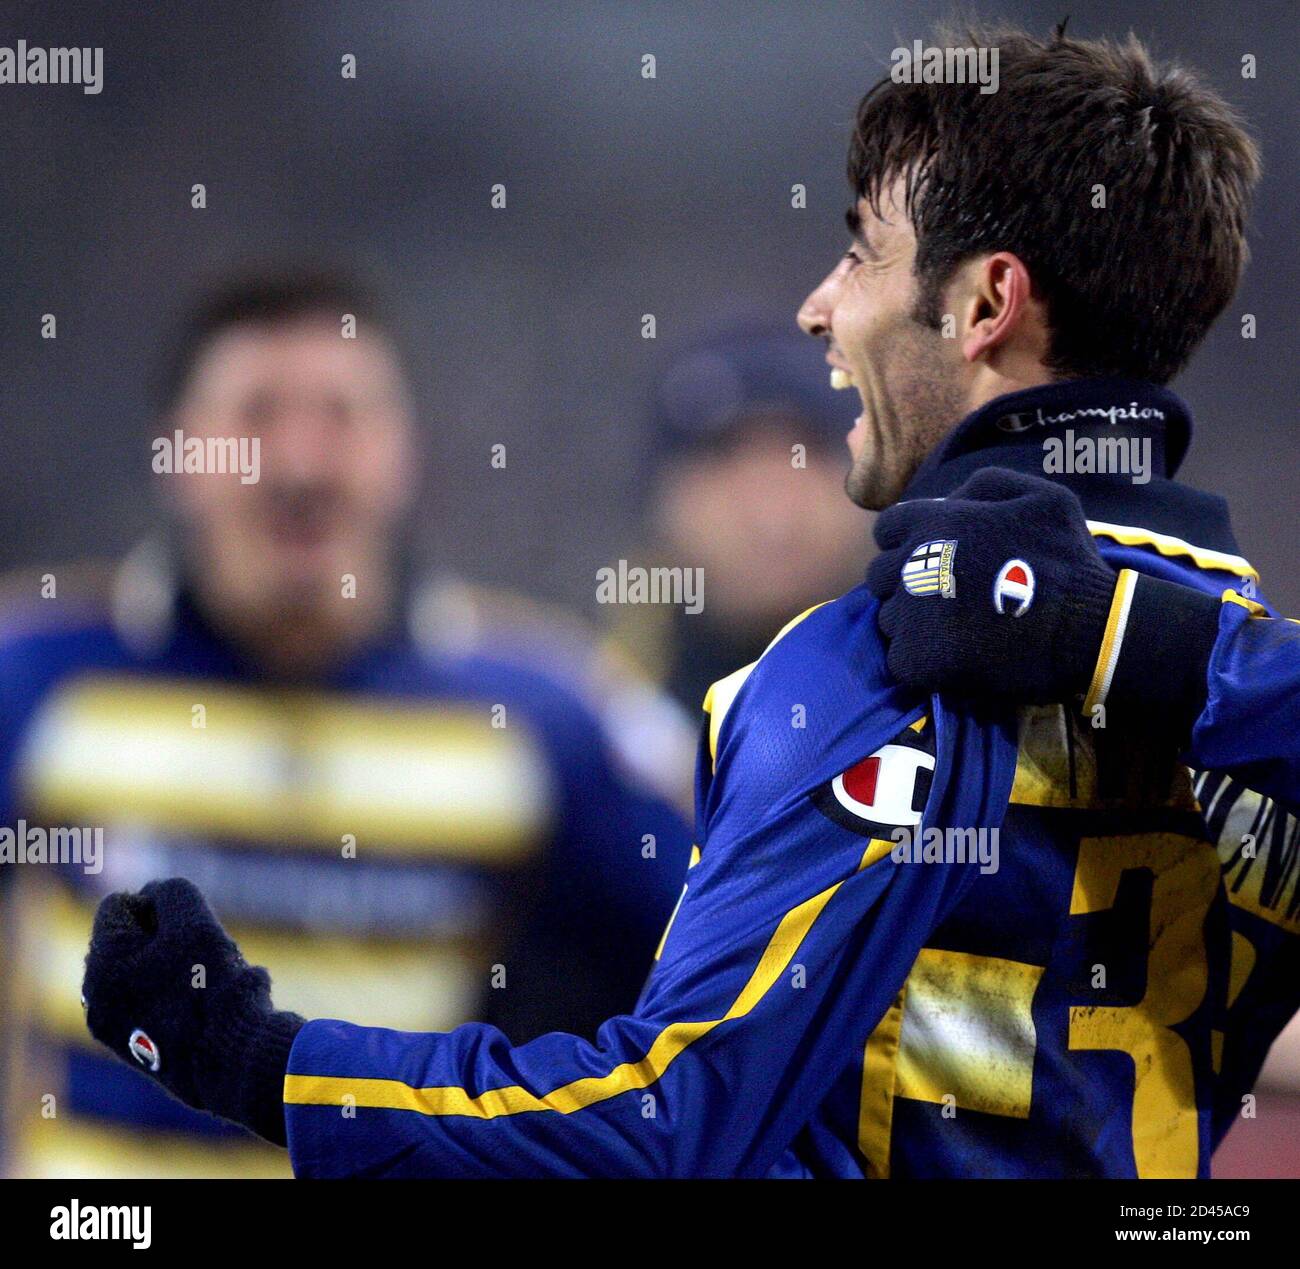 Parma's Marco Marchionni celebrates his goal during their UEFA Cup Round of 32 second leg soccer match against VfB Stuttgart in Stuttgart February 24, 2005. REUTERS/Thomas Bohlen  TB/MD Stock Photo